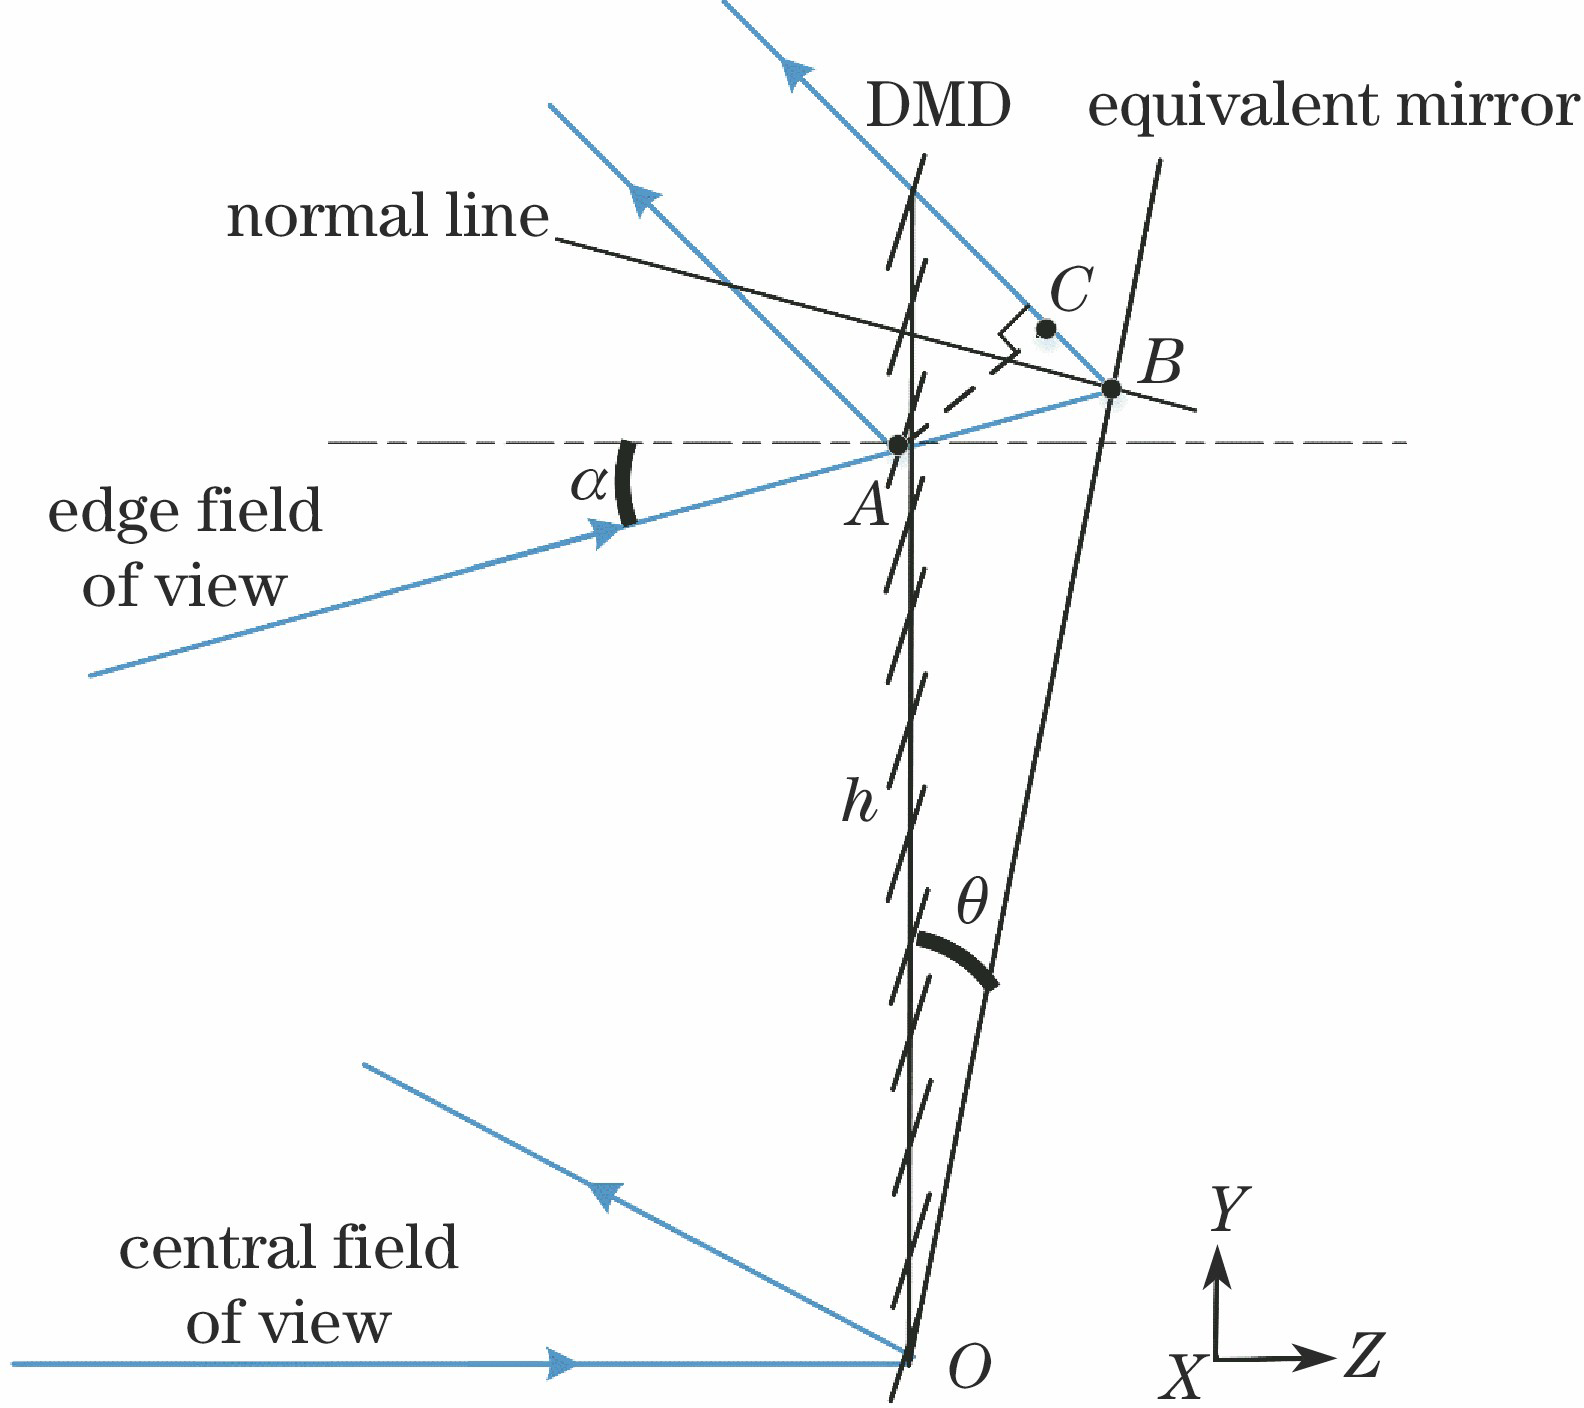 Optical path diagram of DMD and equivalent mirror in convergent light path